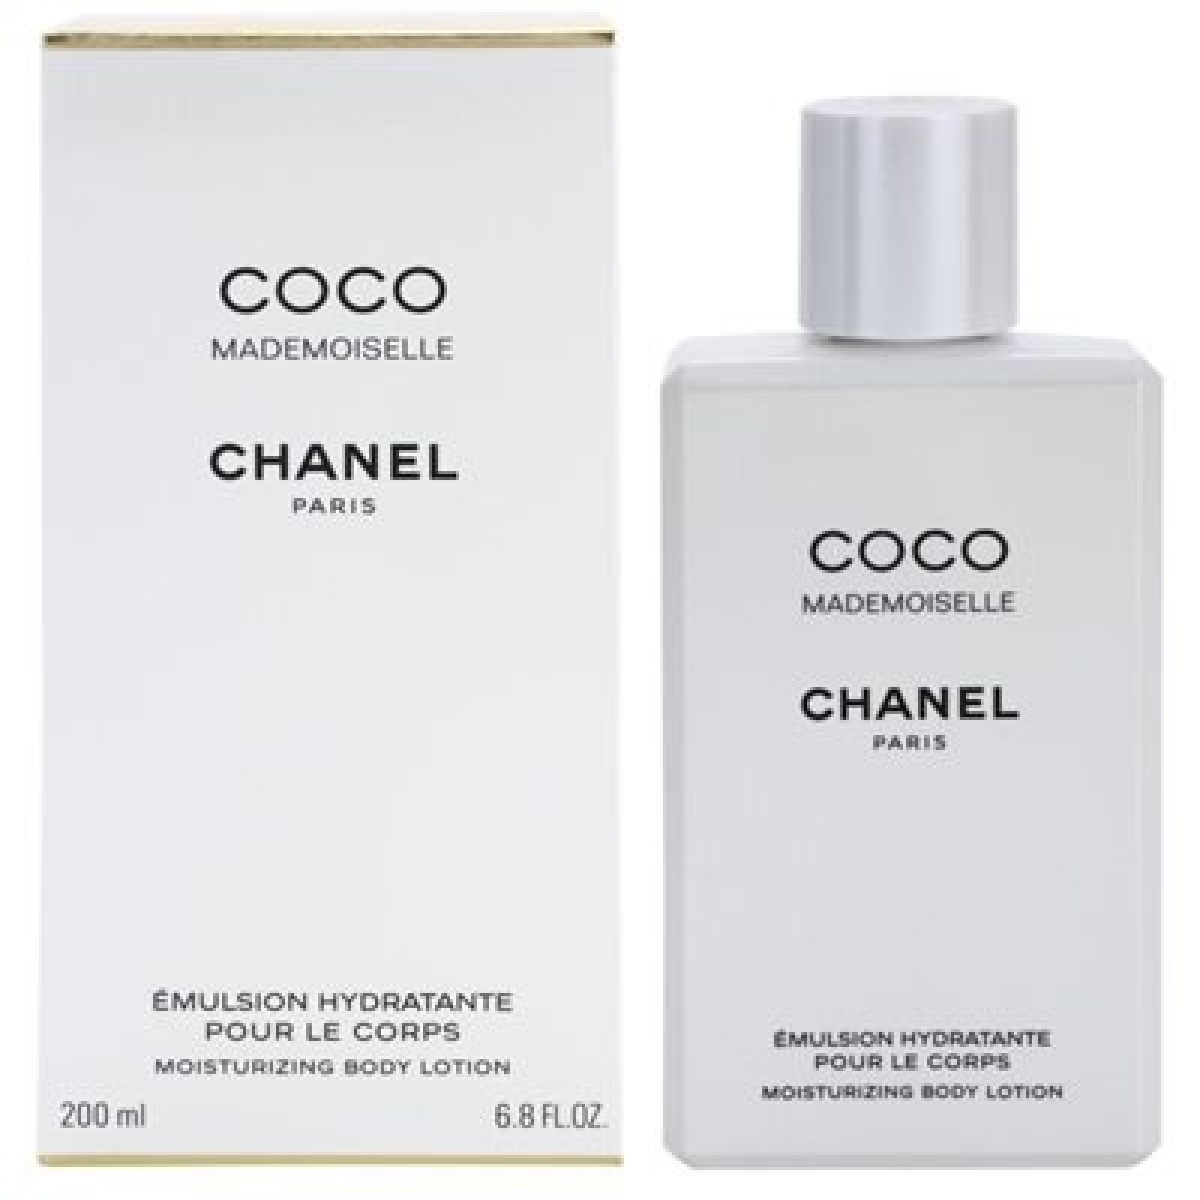 CHANEL Coco Mademoiselle Moisturizing Body Lotion - 200ml for sale online